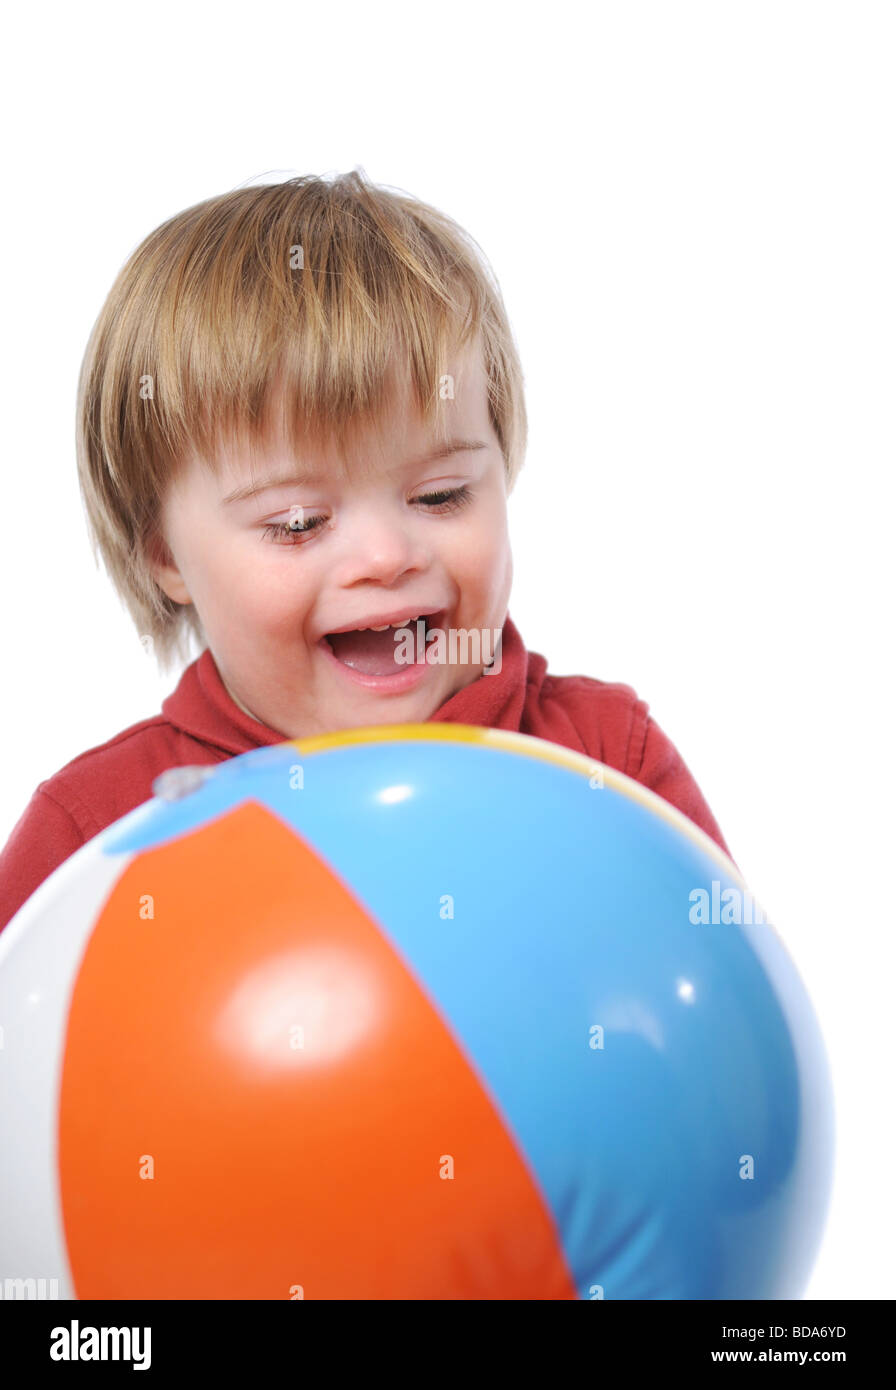 Child with down syndrome playing with a ball Stock Photo